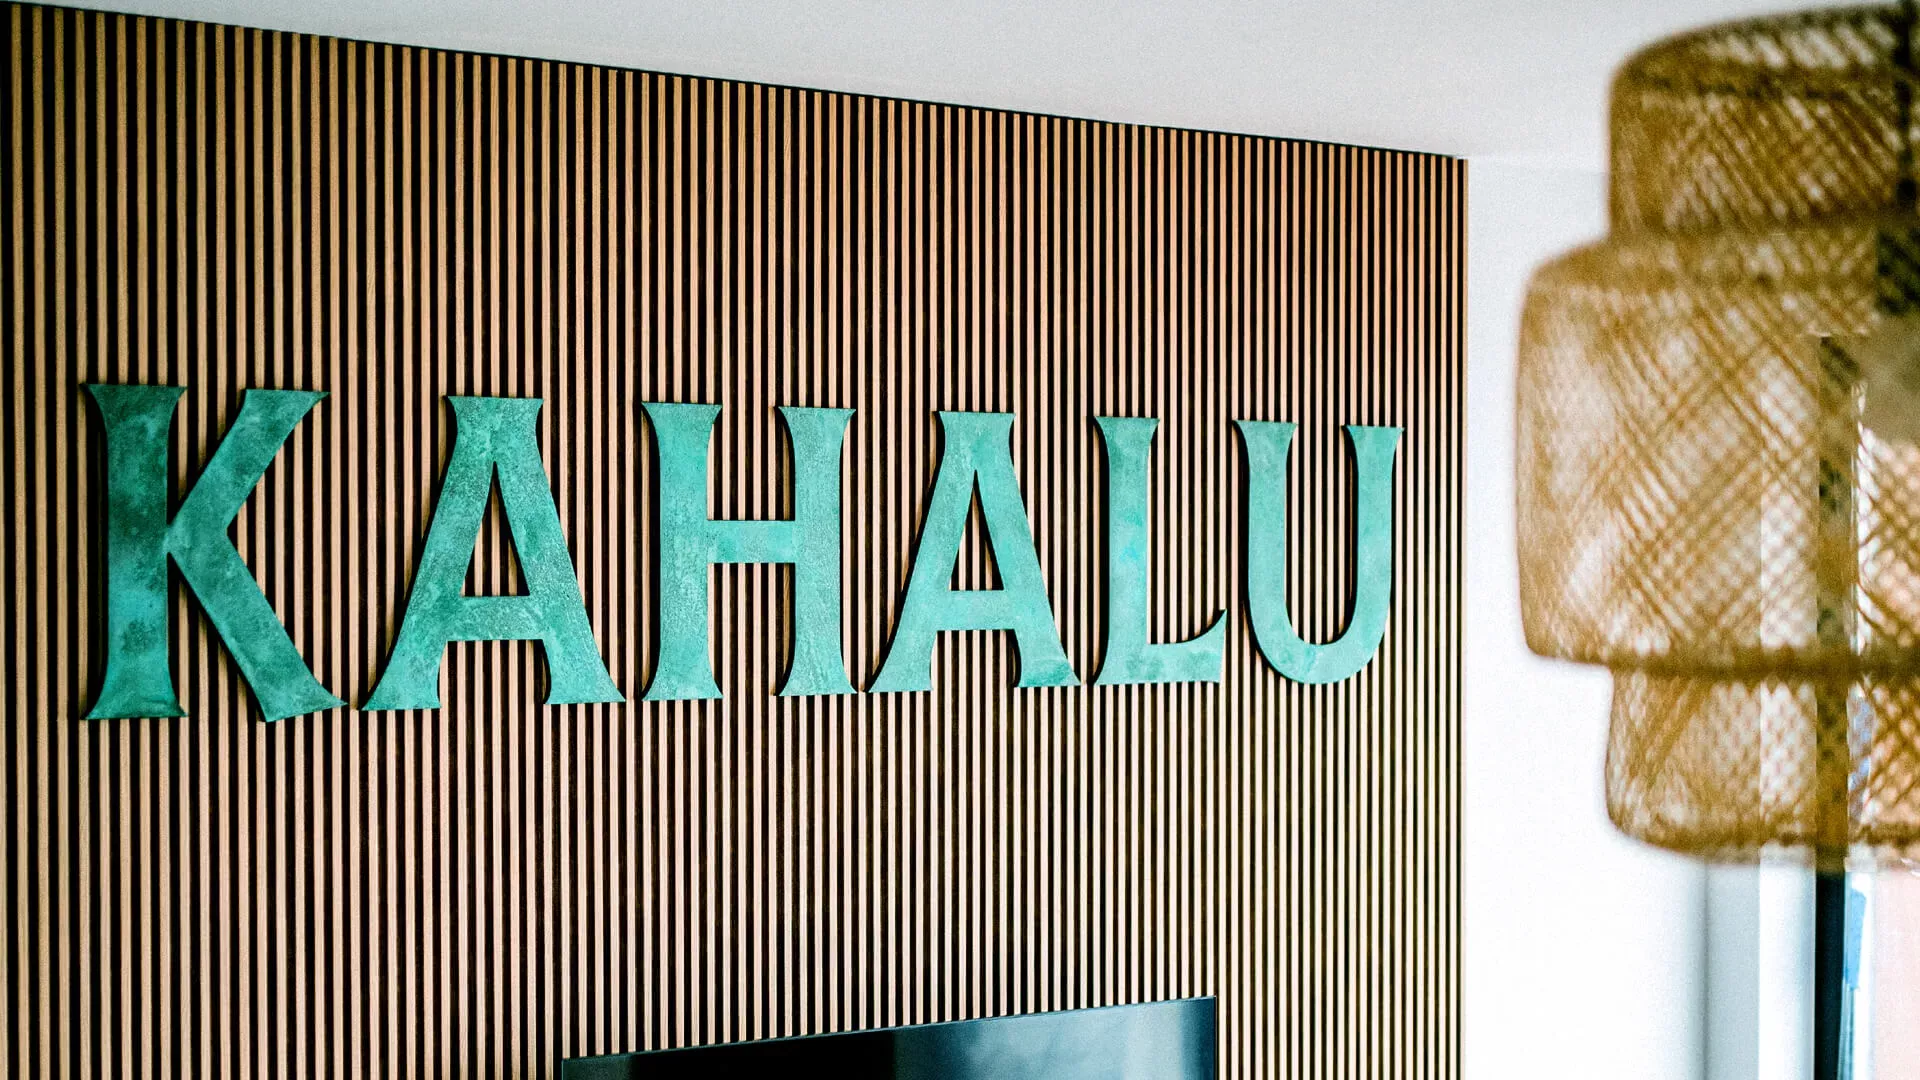 Kahalu - inscription made of metal in industrial style covered with patina